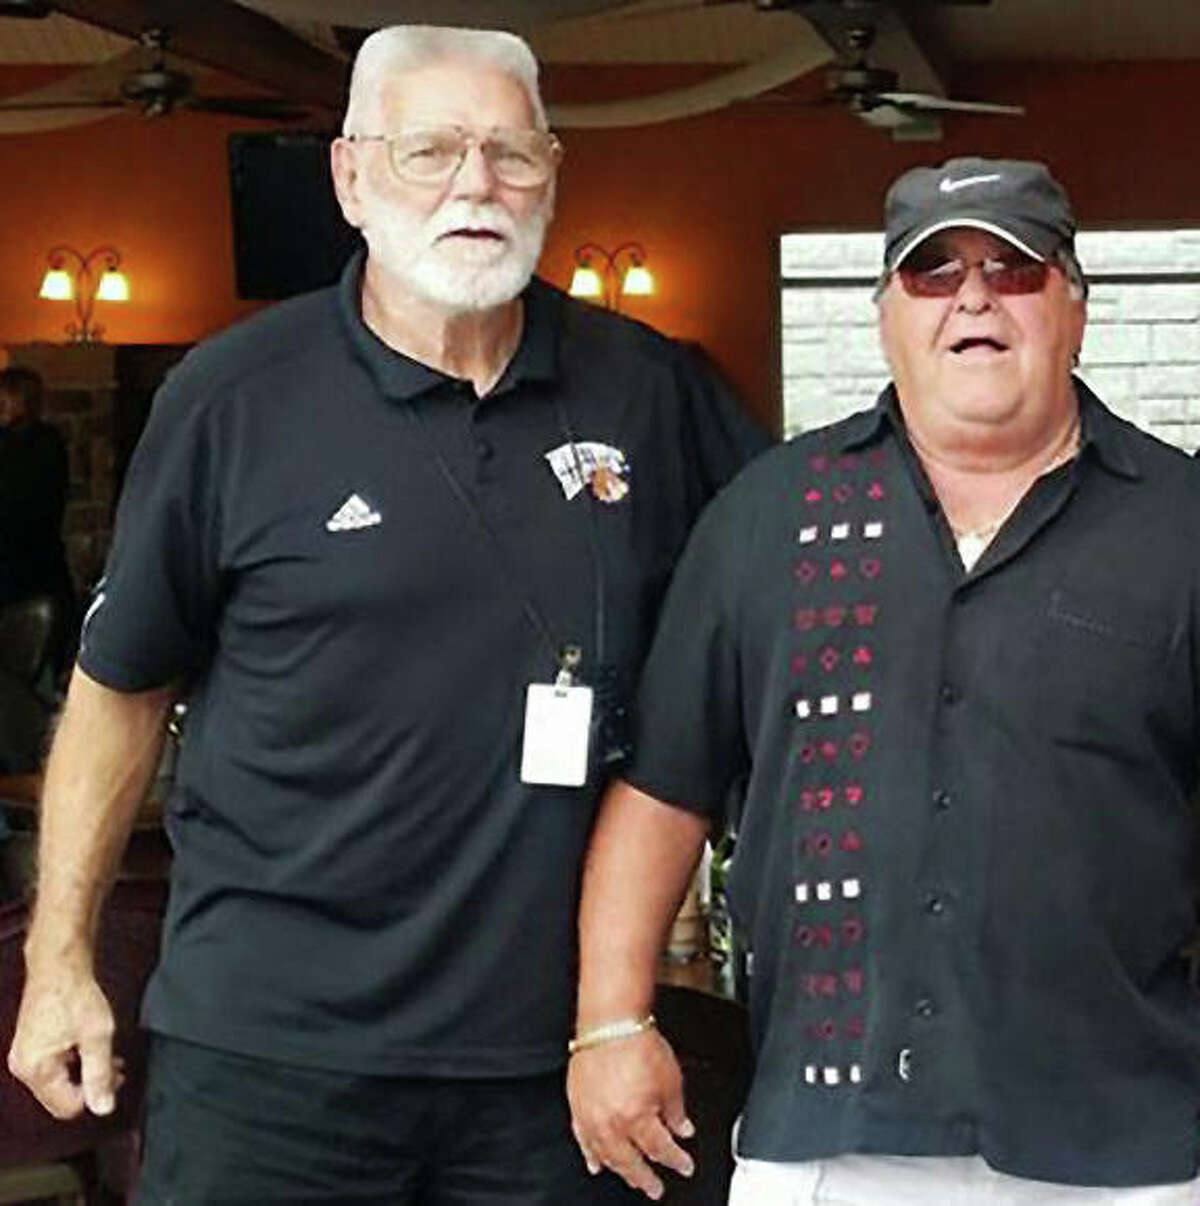 Billy Joe Brockhouse (left) and Tom Pile grew up together as cousins in Winchester. Their life-long relationship grew into much more as coaches and friends before Brockhouse passed away Thursday at age 76 back in his hometown of Winchester.